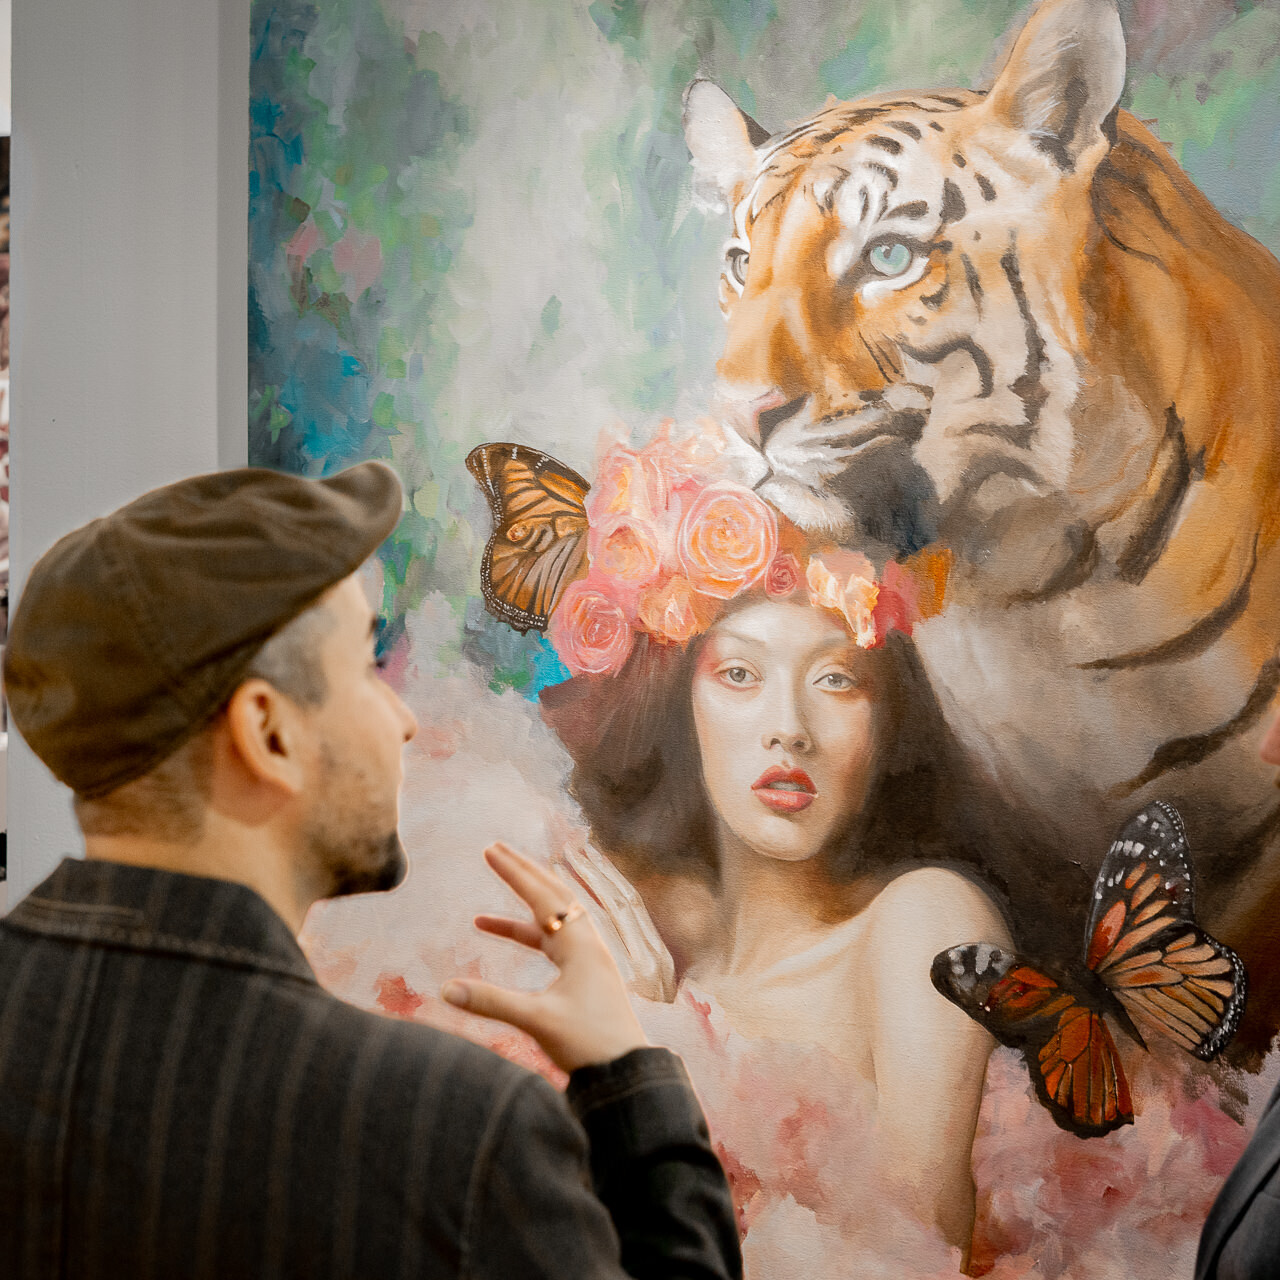 A man listens intently to artist Alex Righetto at an art exhibition with 'The Guardian' in the background, illustrating the power of art to captivate and tell stories.